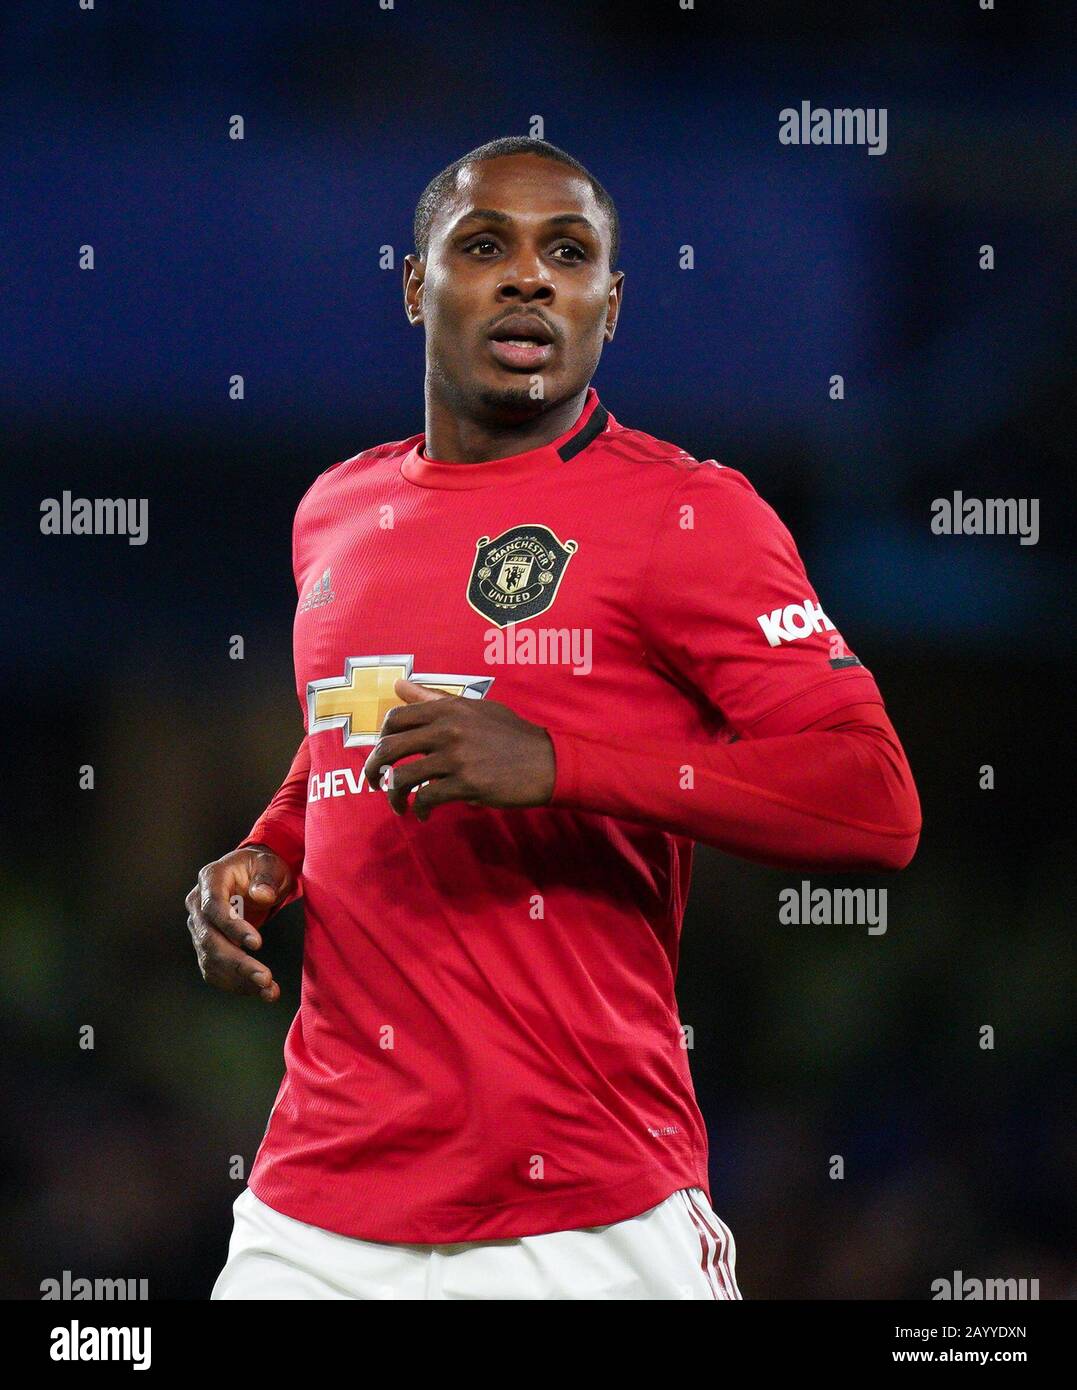 London, UK. 17th Feb, 2020. Odion Ighalo (on loan from Shanghai Shenhua) of Man Utd during the Premier League match between Chelsea and Manchester United at Stamford Bridge, London, England on 17 February 2020. Photo by Andy Rowland. Credit: PRiME Media Images/Alamy Live News Stock Photo